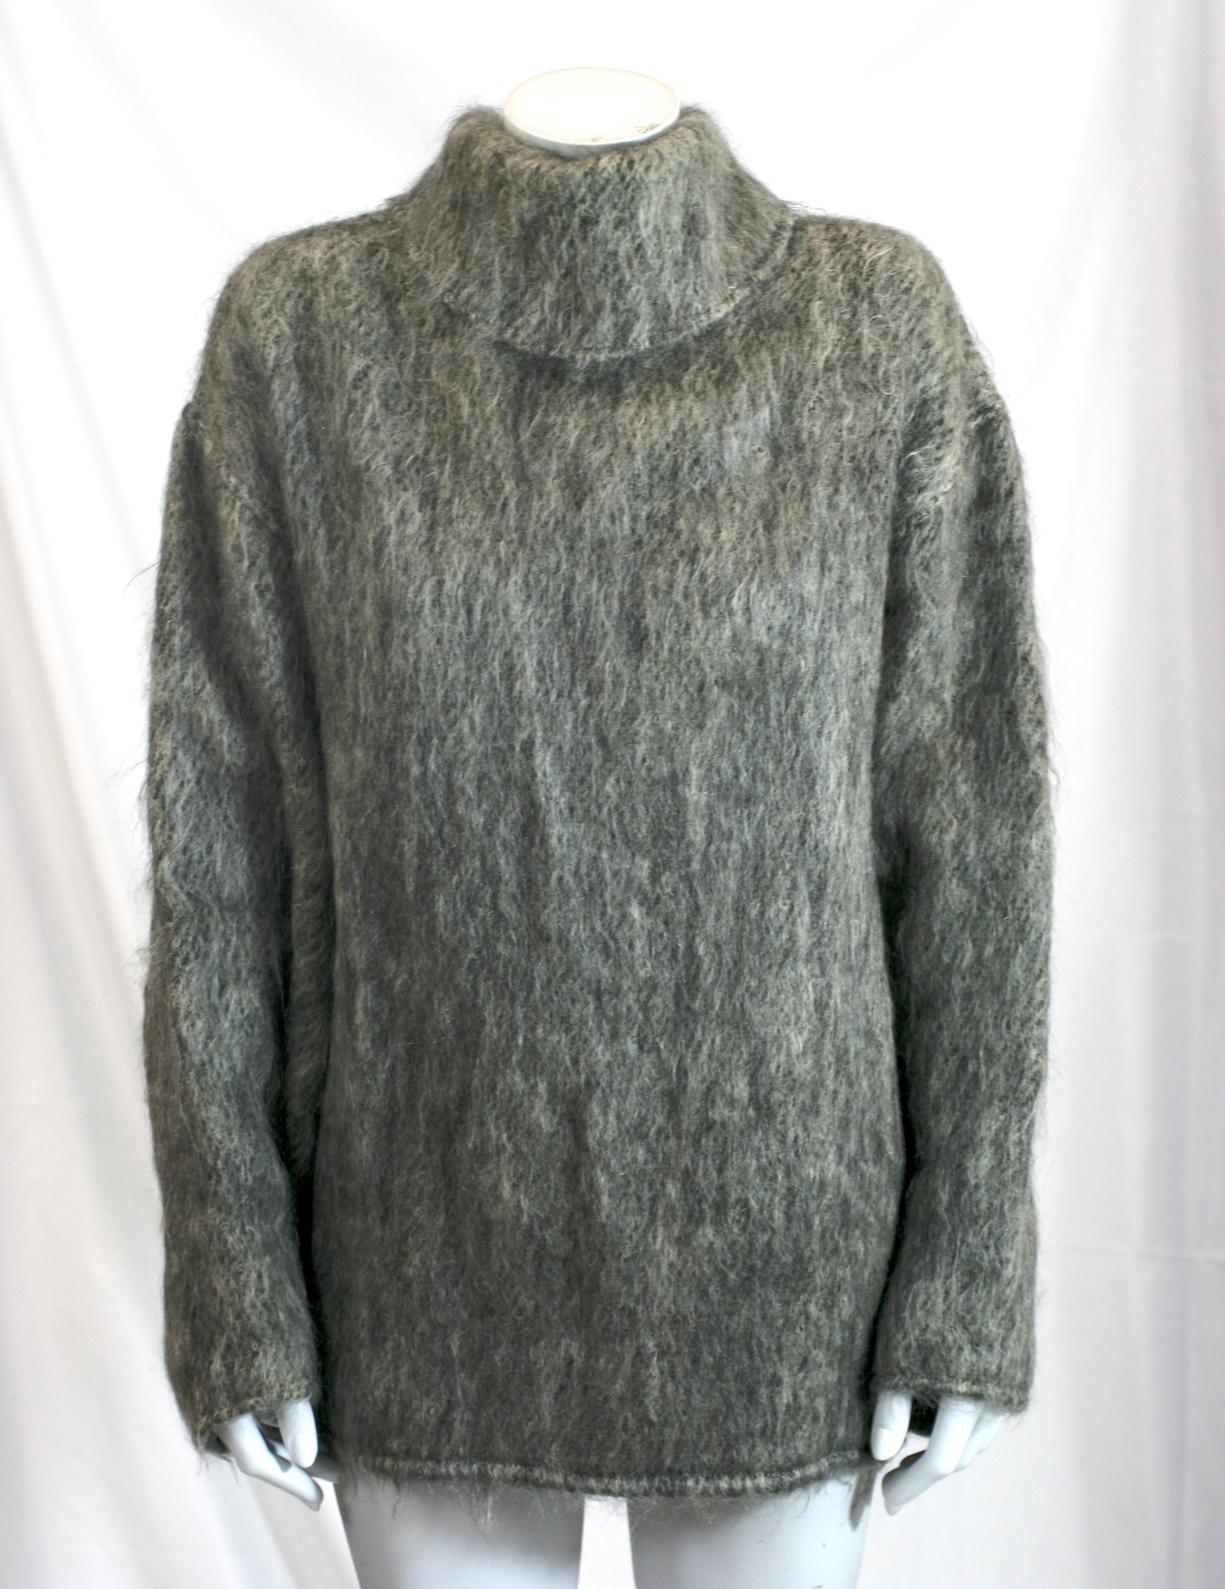 Anne Marie Beretta Brushed Mohair Blouse In Excellent Condition For Sale In New York, NY